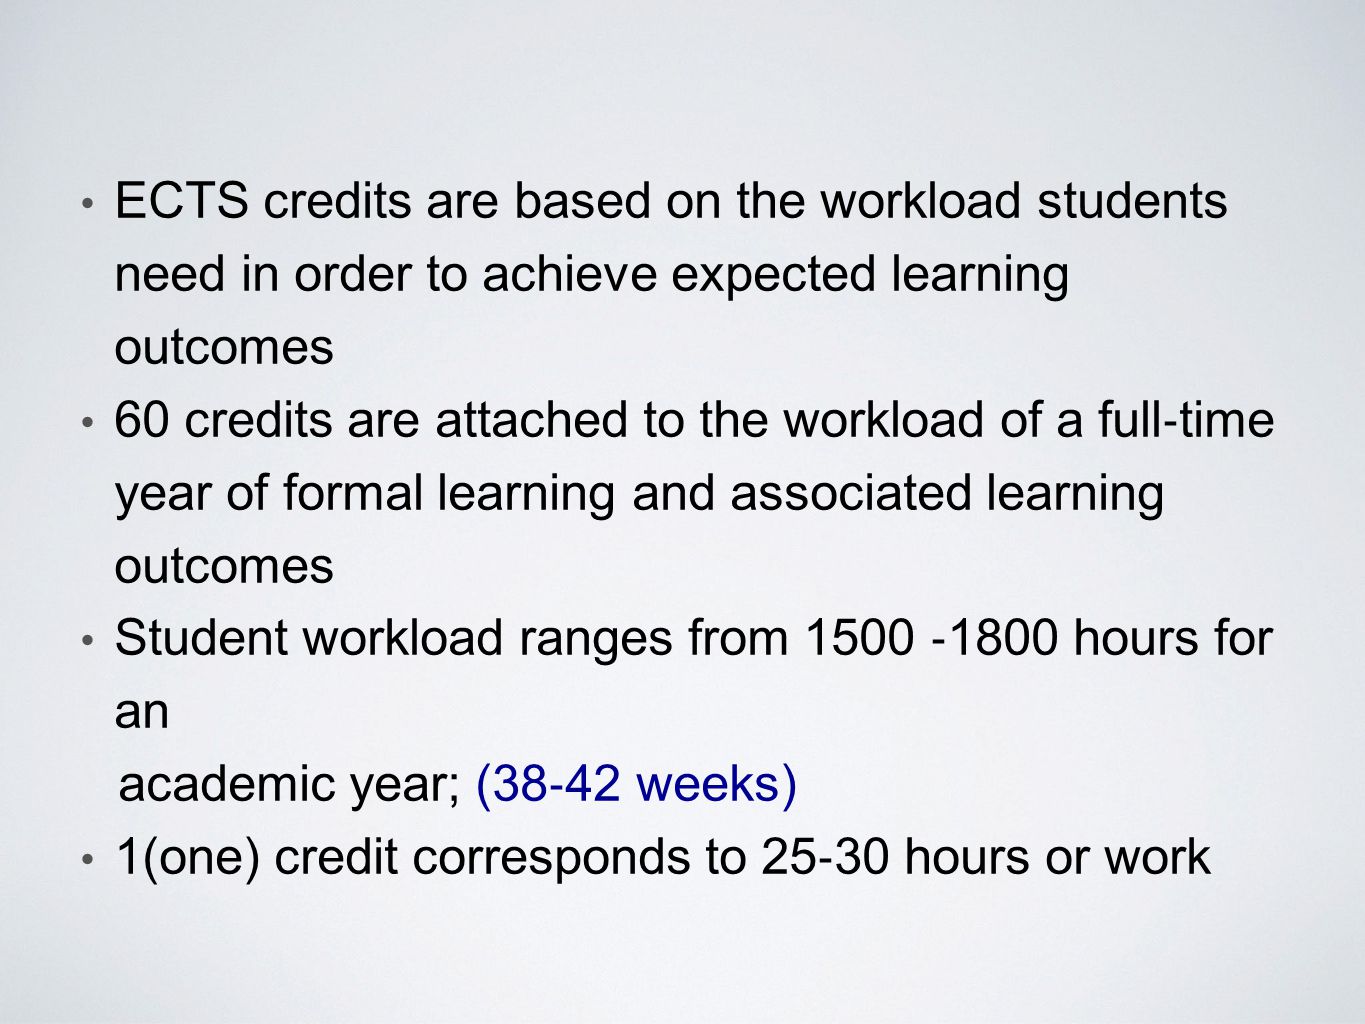 ECTS credits are based on the workload students need in order to achieve expected learning outcomes 60 credits are attached to the workload of a full ‐ time year of formal learning and associated learning outcomes Student workload ranges from 1500 ‐ 1800 hours for an academic year; (38 ‐ 42 weeks) 1(one) credit corresponds to 25 ‐ 30 hours or work